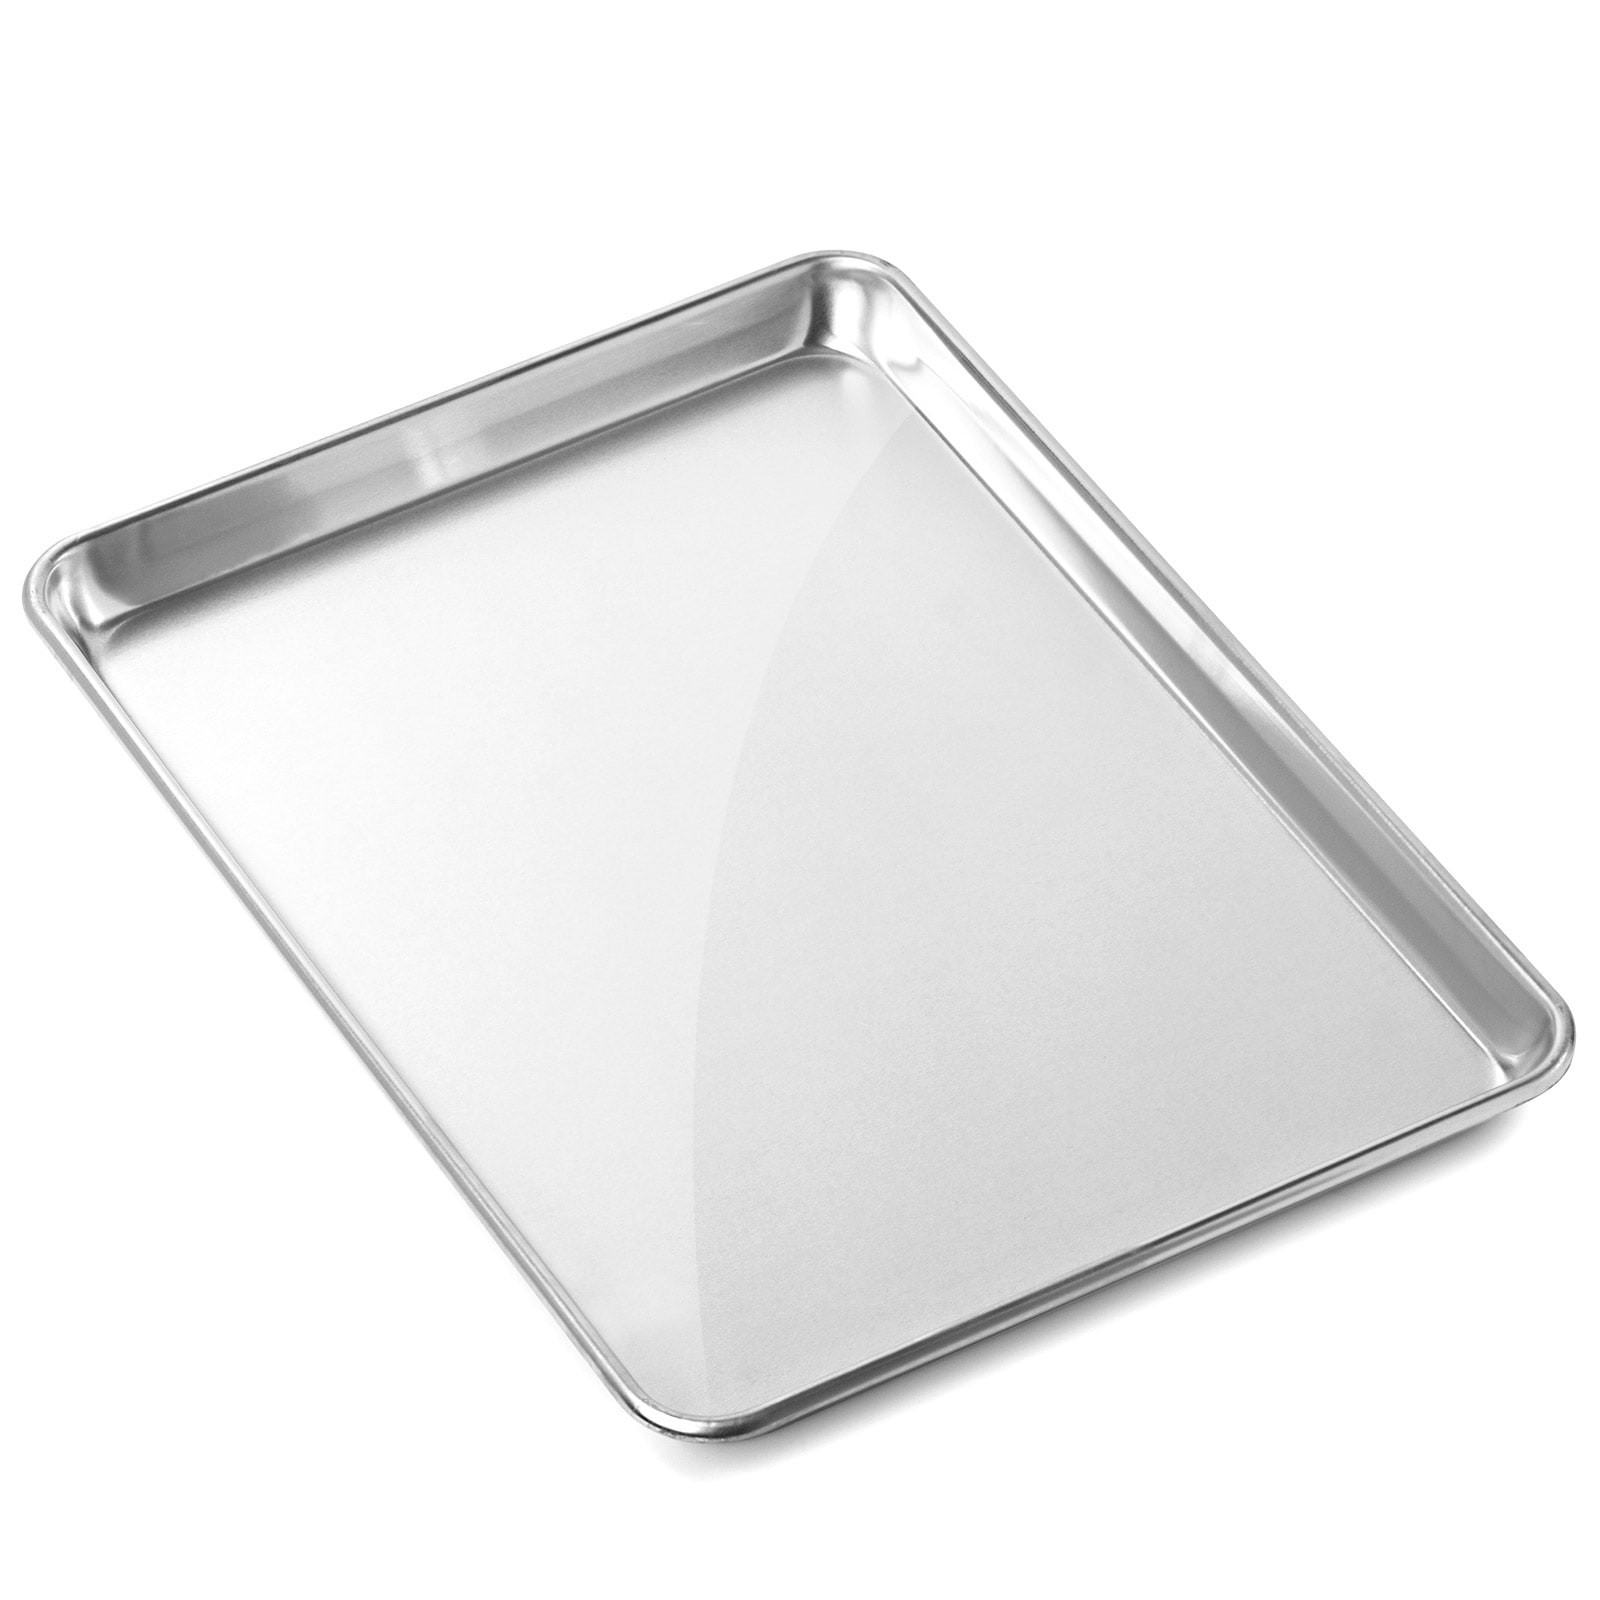 13 x 18 Inch 6-Pack, Commercial Aluminum Cookie Sheets by GRIDMANN